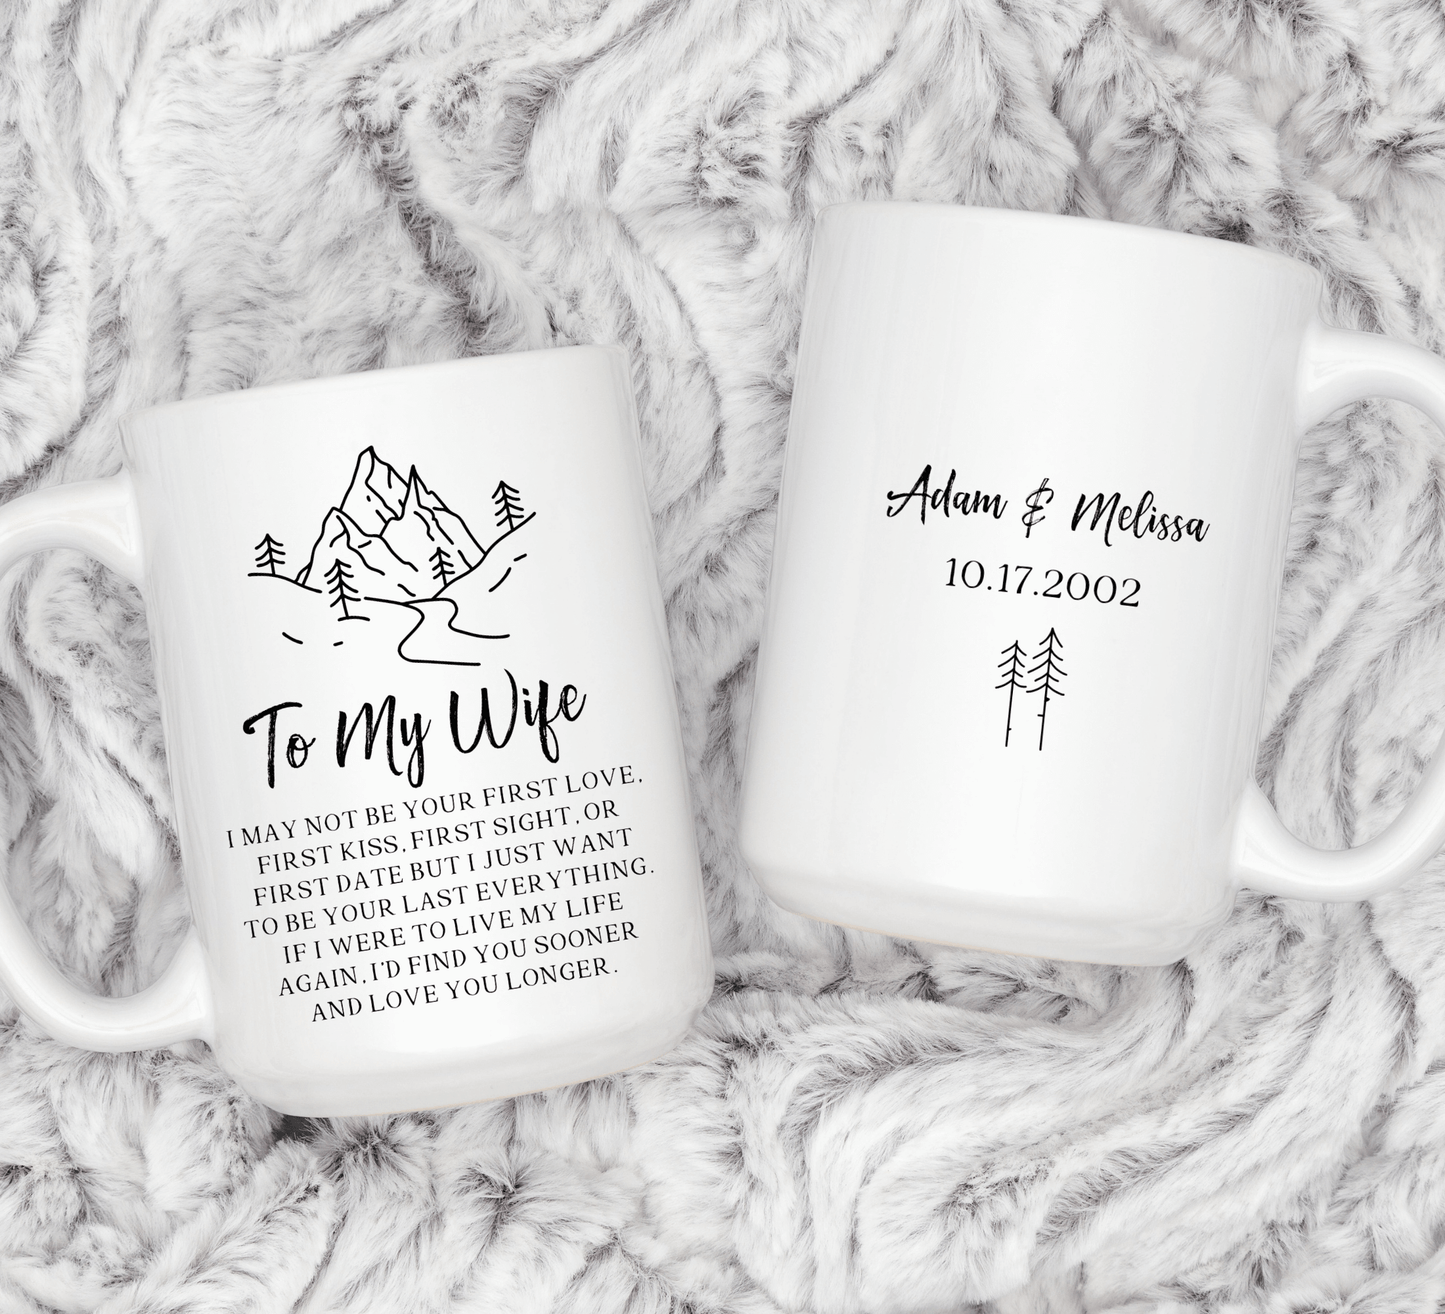 To My Wife - Last Everything - 15oz Accent Mug